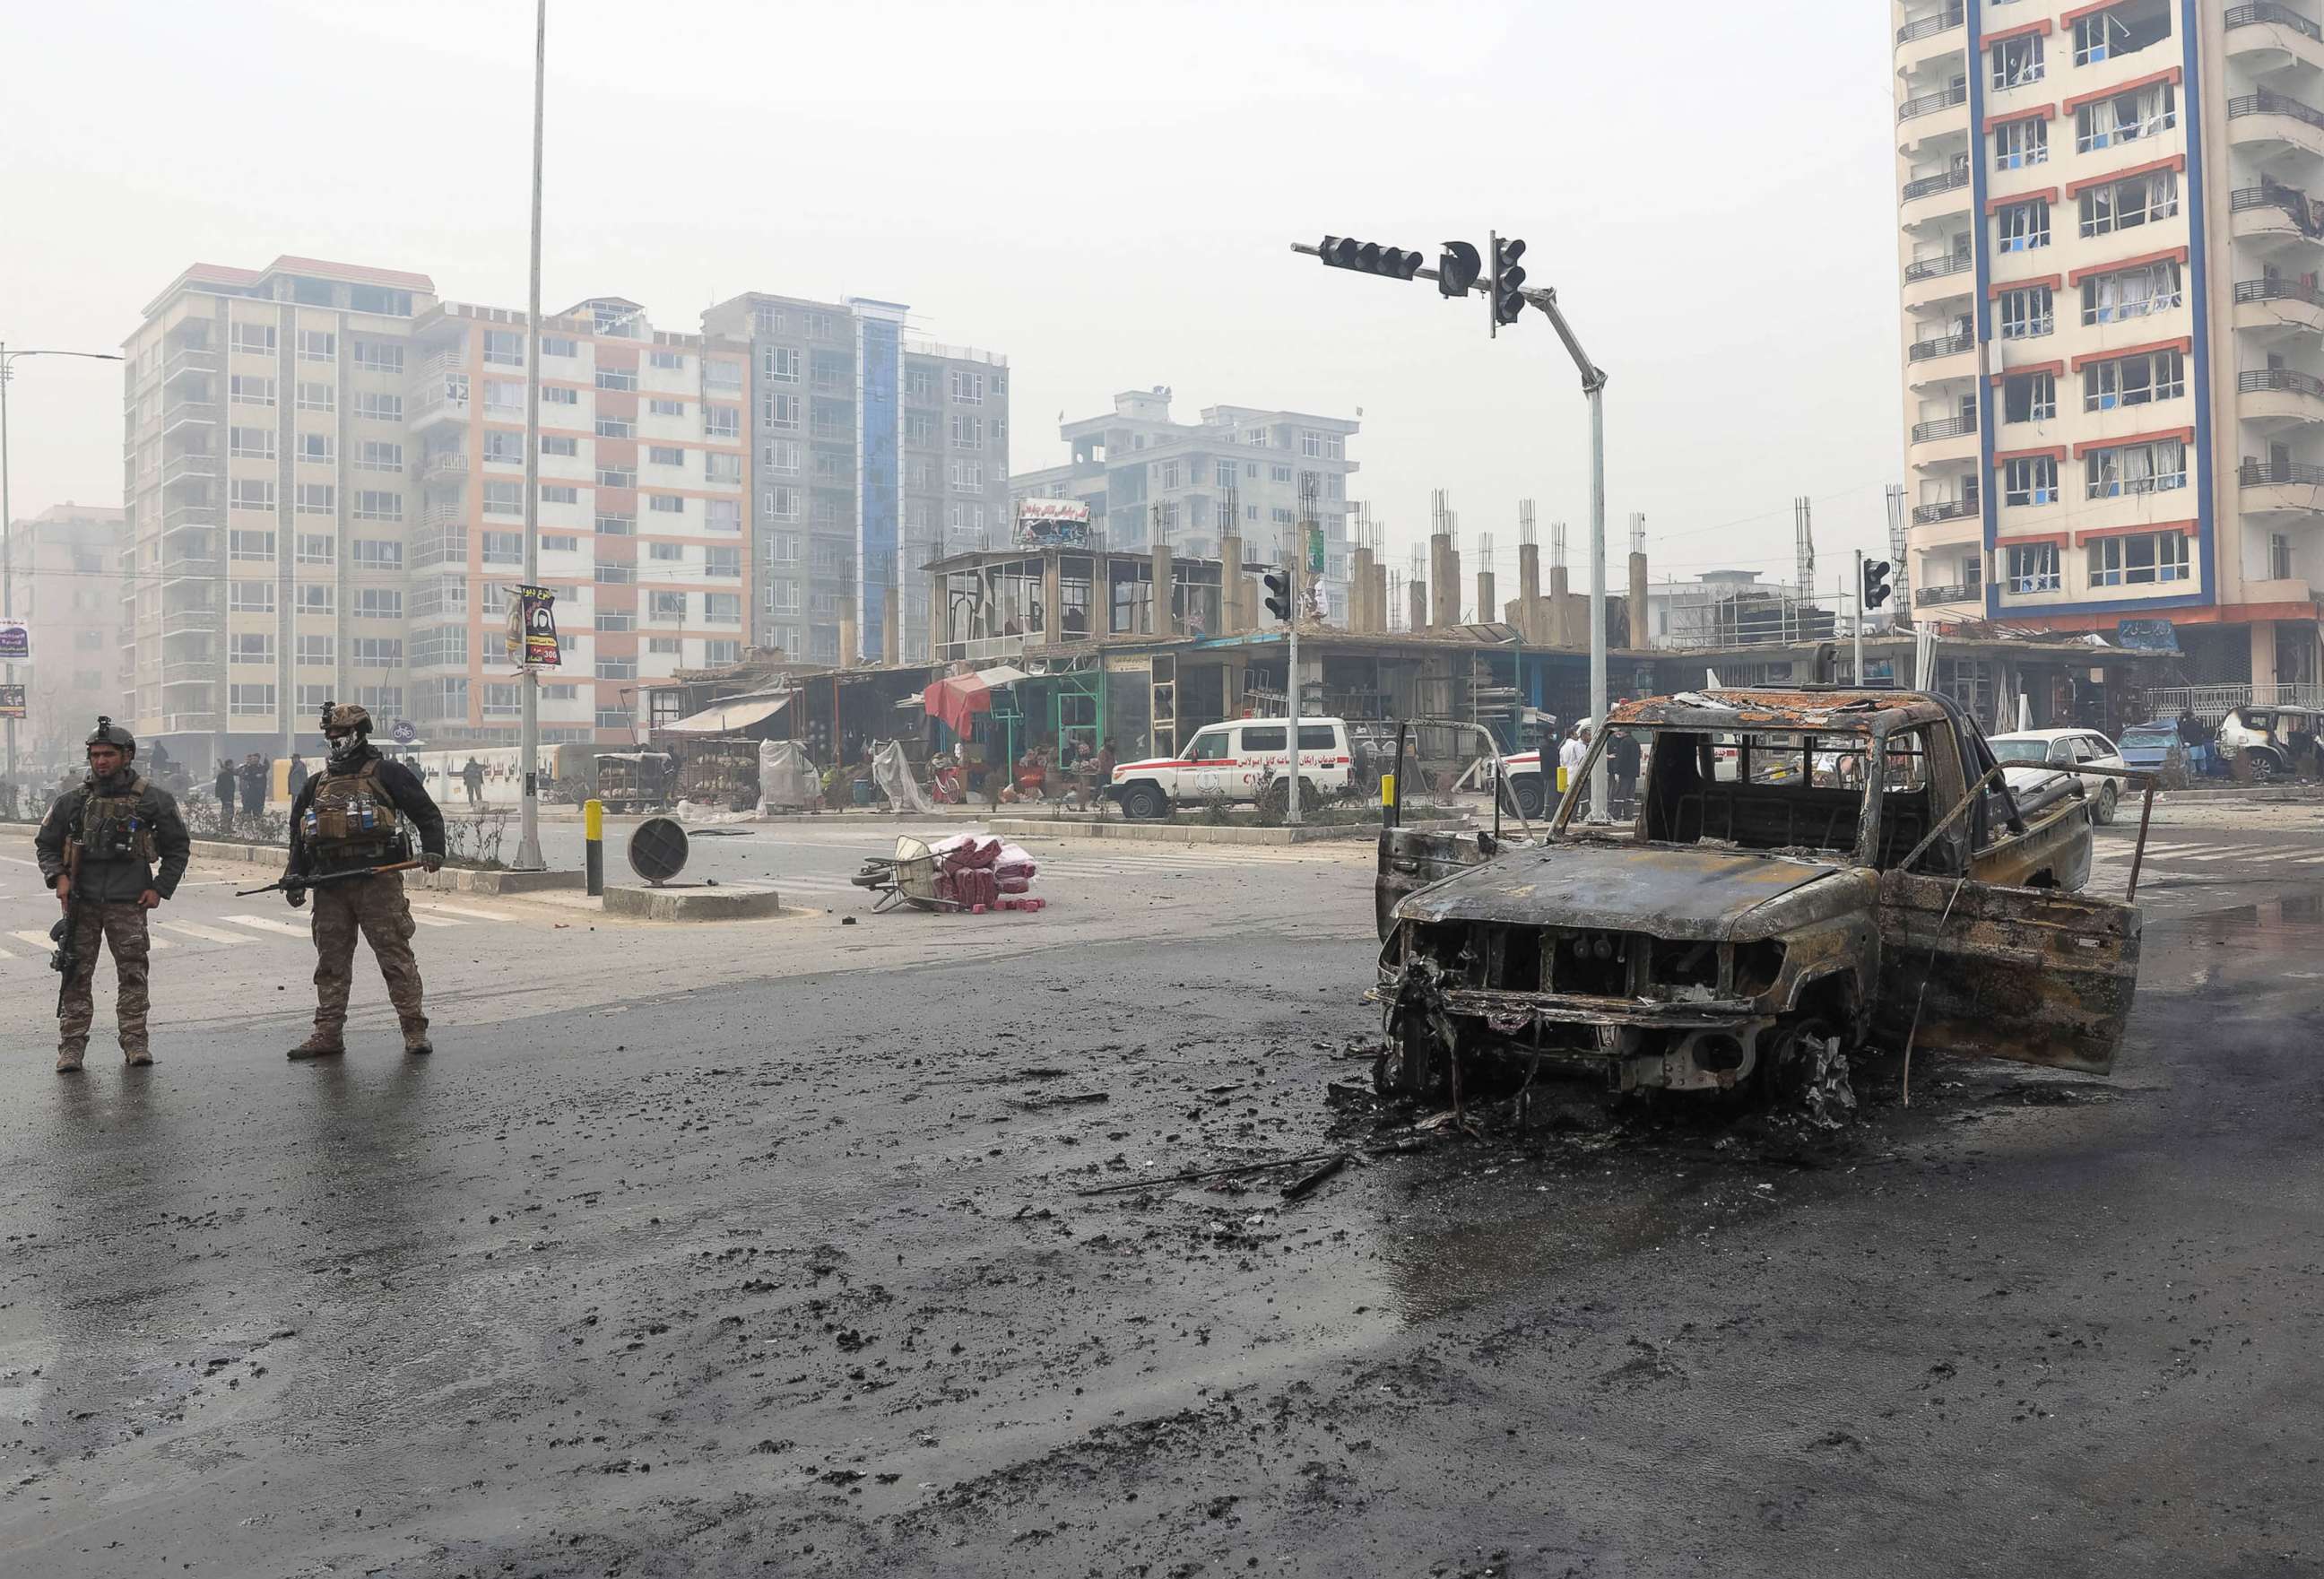 PHOTO: A charred vehicle sits in the road as Afghan security forces inspect the site of a bomb explosion in Kabul, Afghanistan, Dec. 20, 2020.